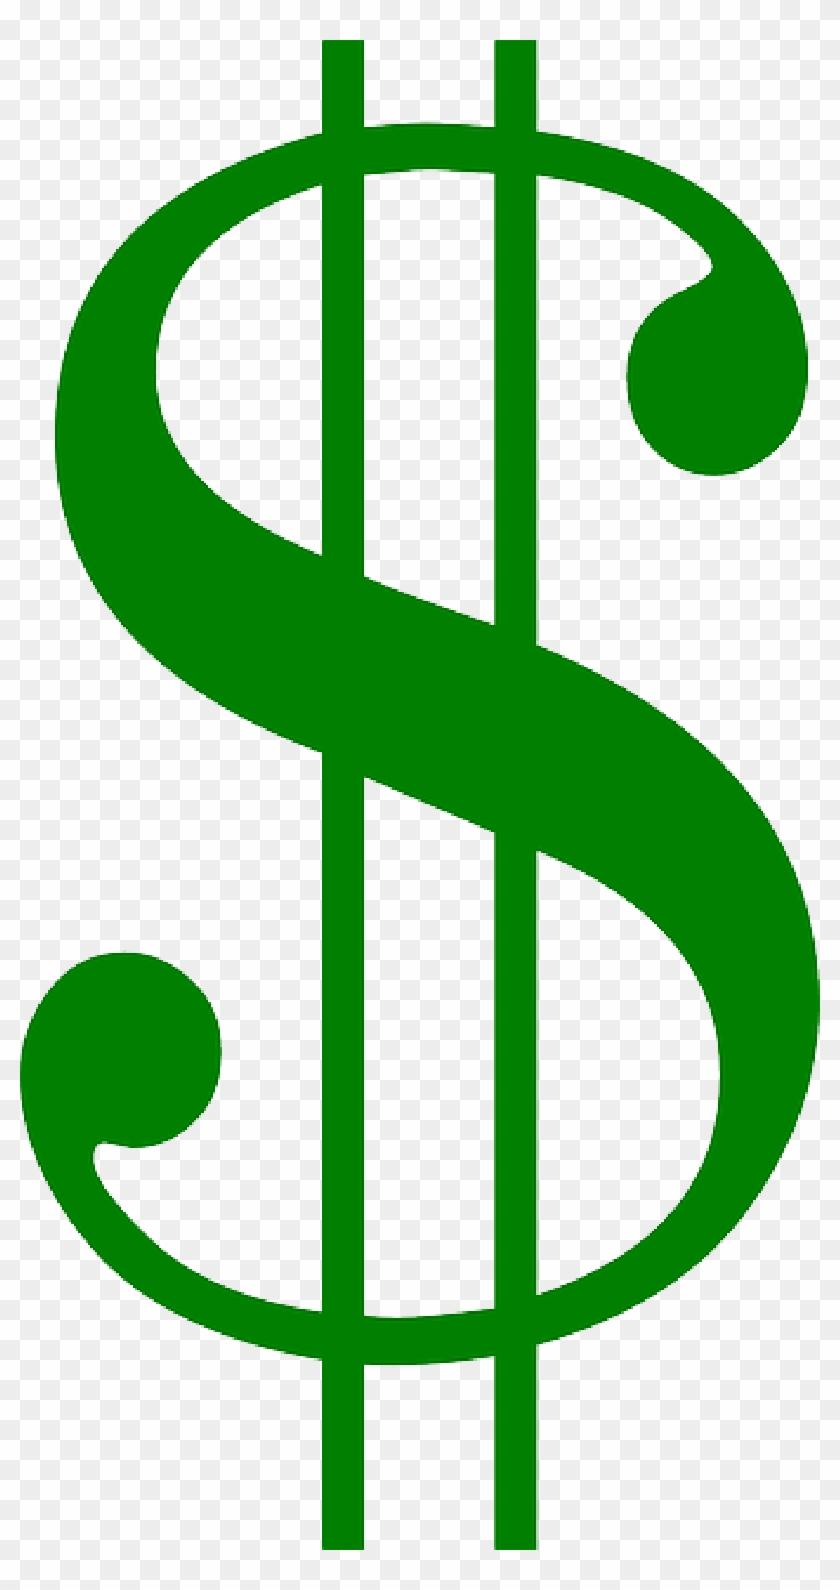 Dollar Sign Clipart - Choose any clipart that best suits your projects ...